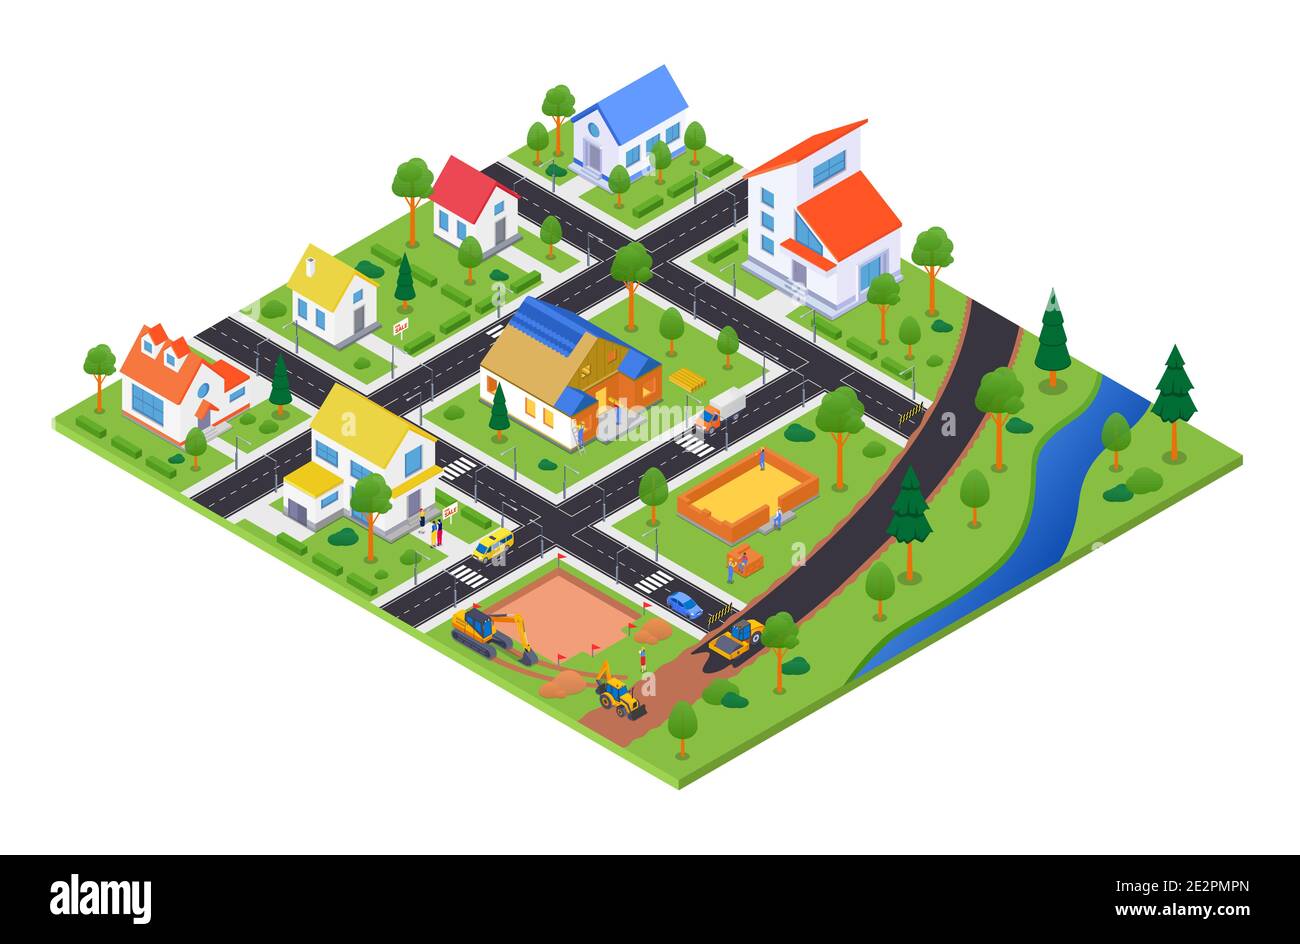 Housing complex under construction - vector colorful isometric illustration. Urban landscape with apartment houses, cottages for sale, road with cars. Stock Vector